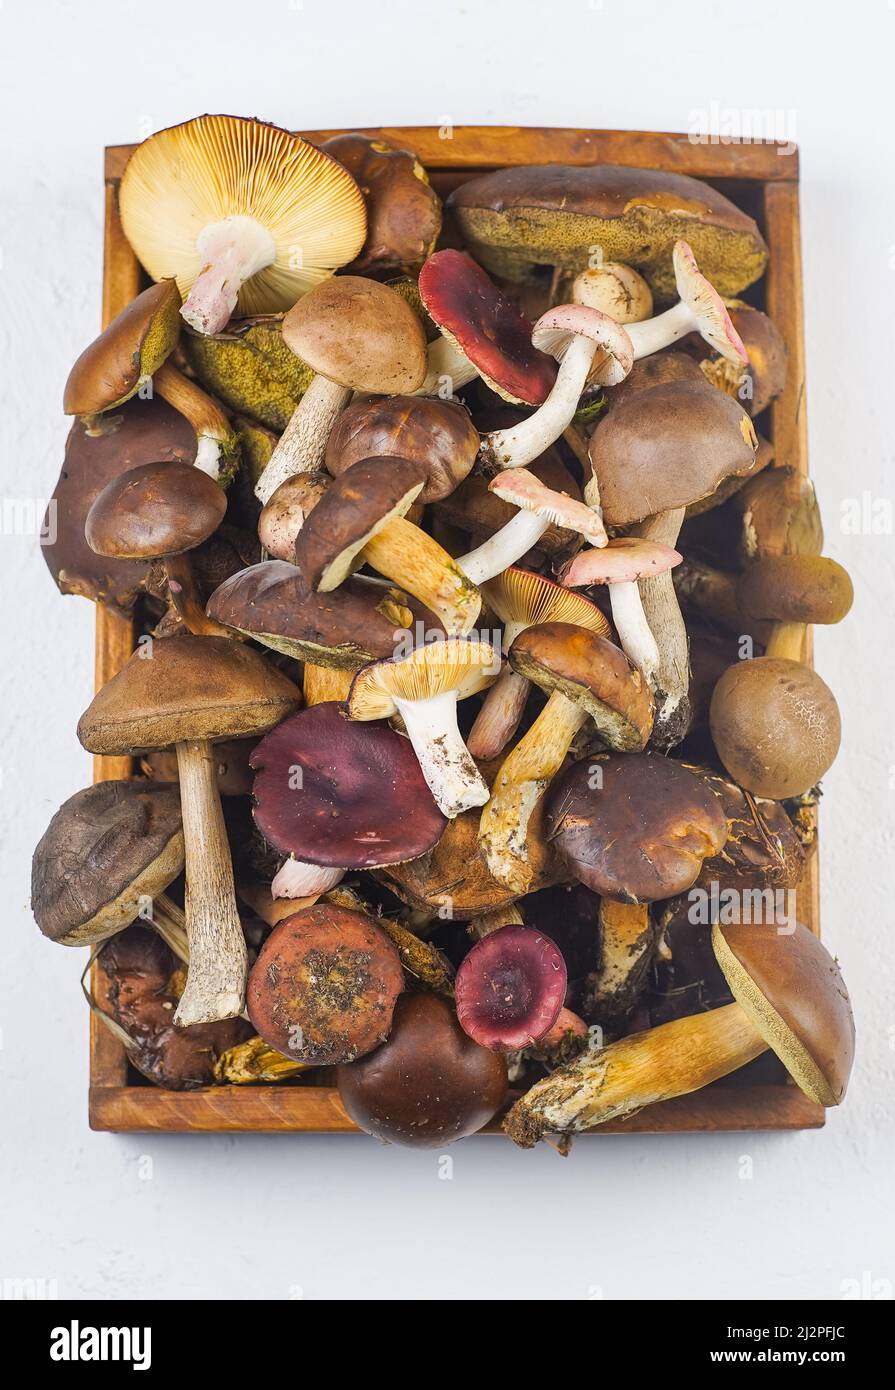 A set of different edible mushrooms. Mushroom background. Food in wooden tray. White mushroom, flywheel, boletus, russula. Top view. Cooking harvest. Stock Photo